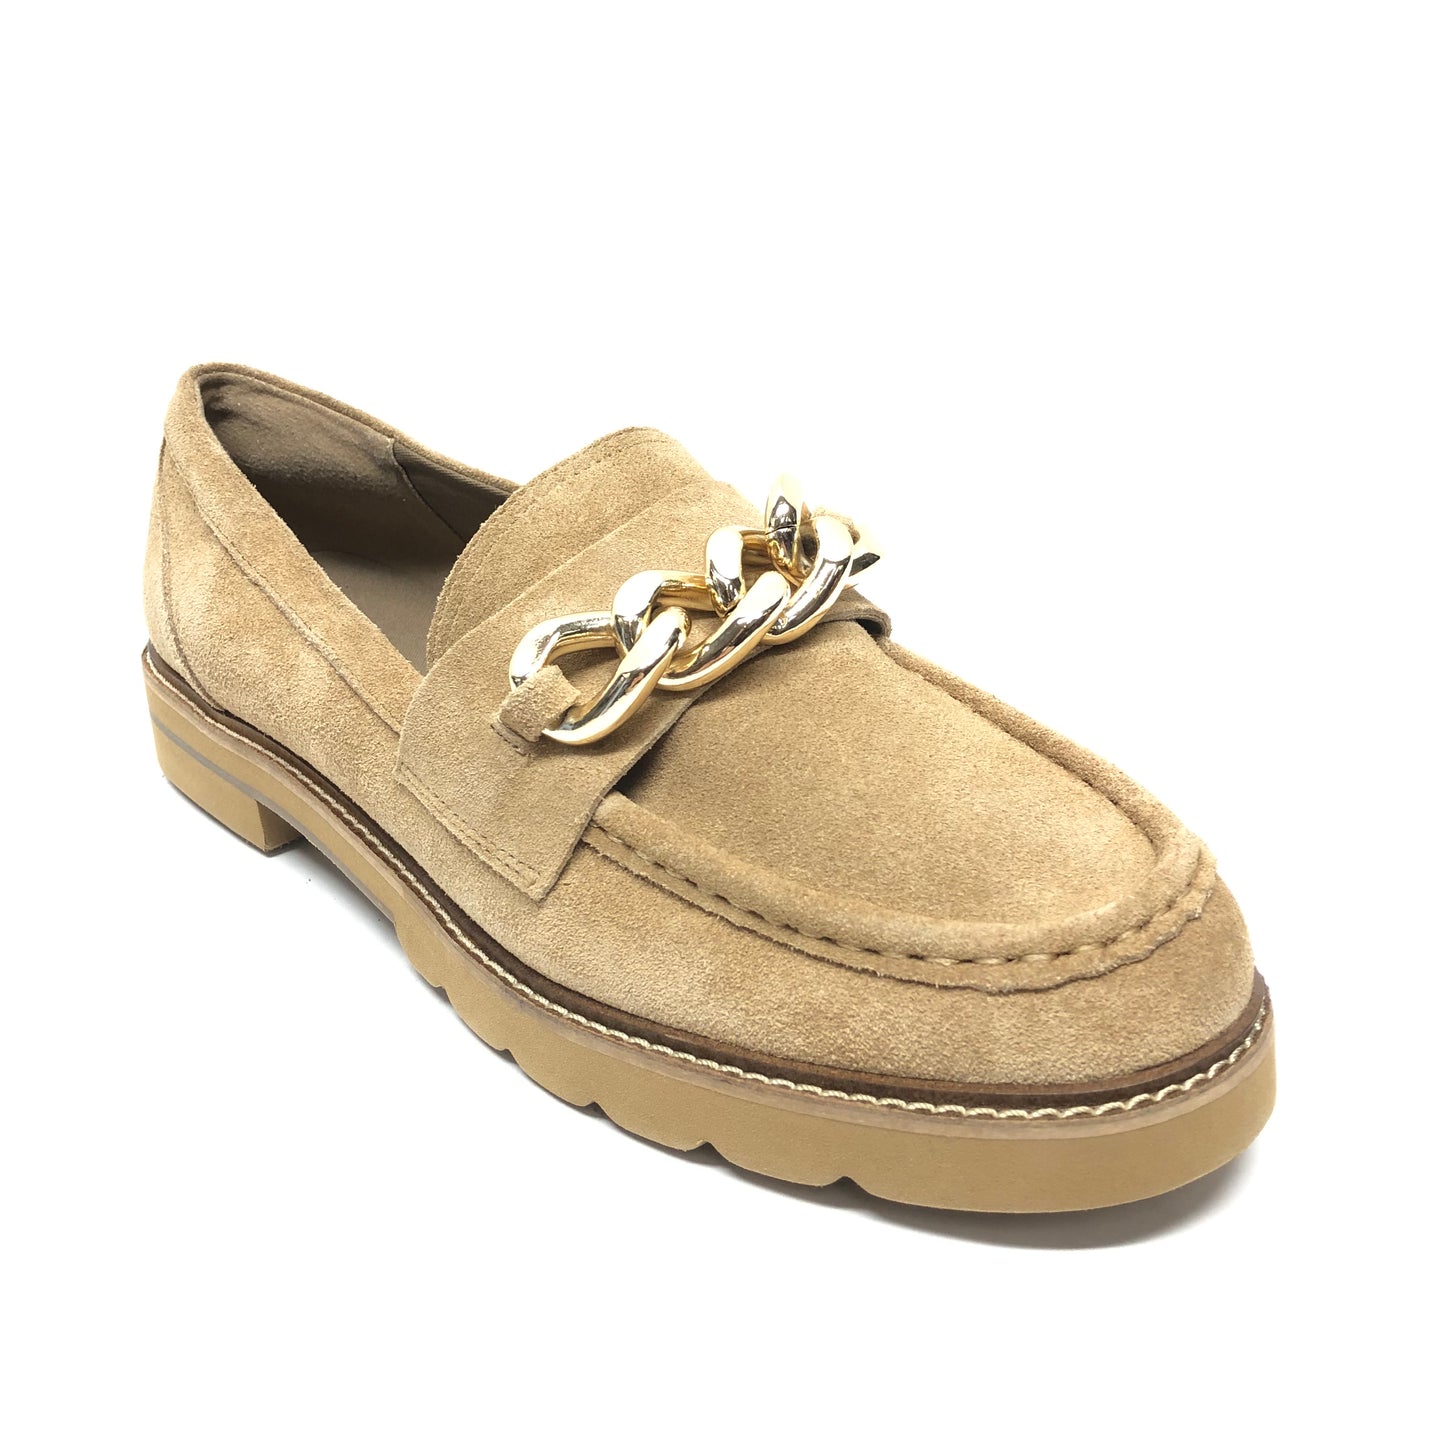 Shoes Flats Loafer Oxford By Anne Klein  Size: 10.5